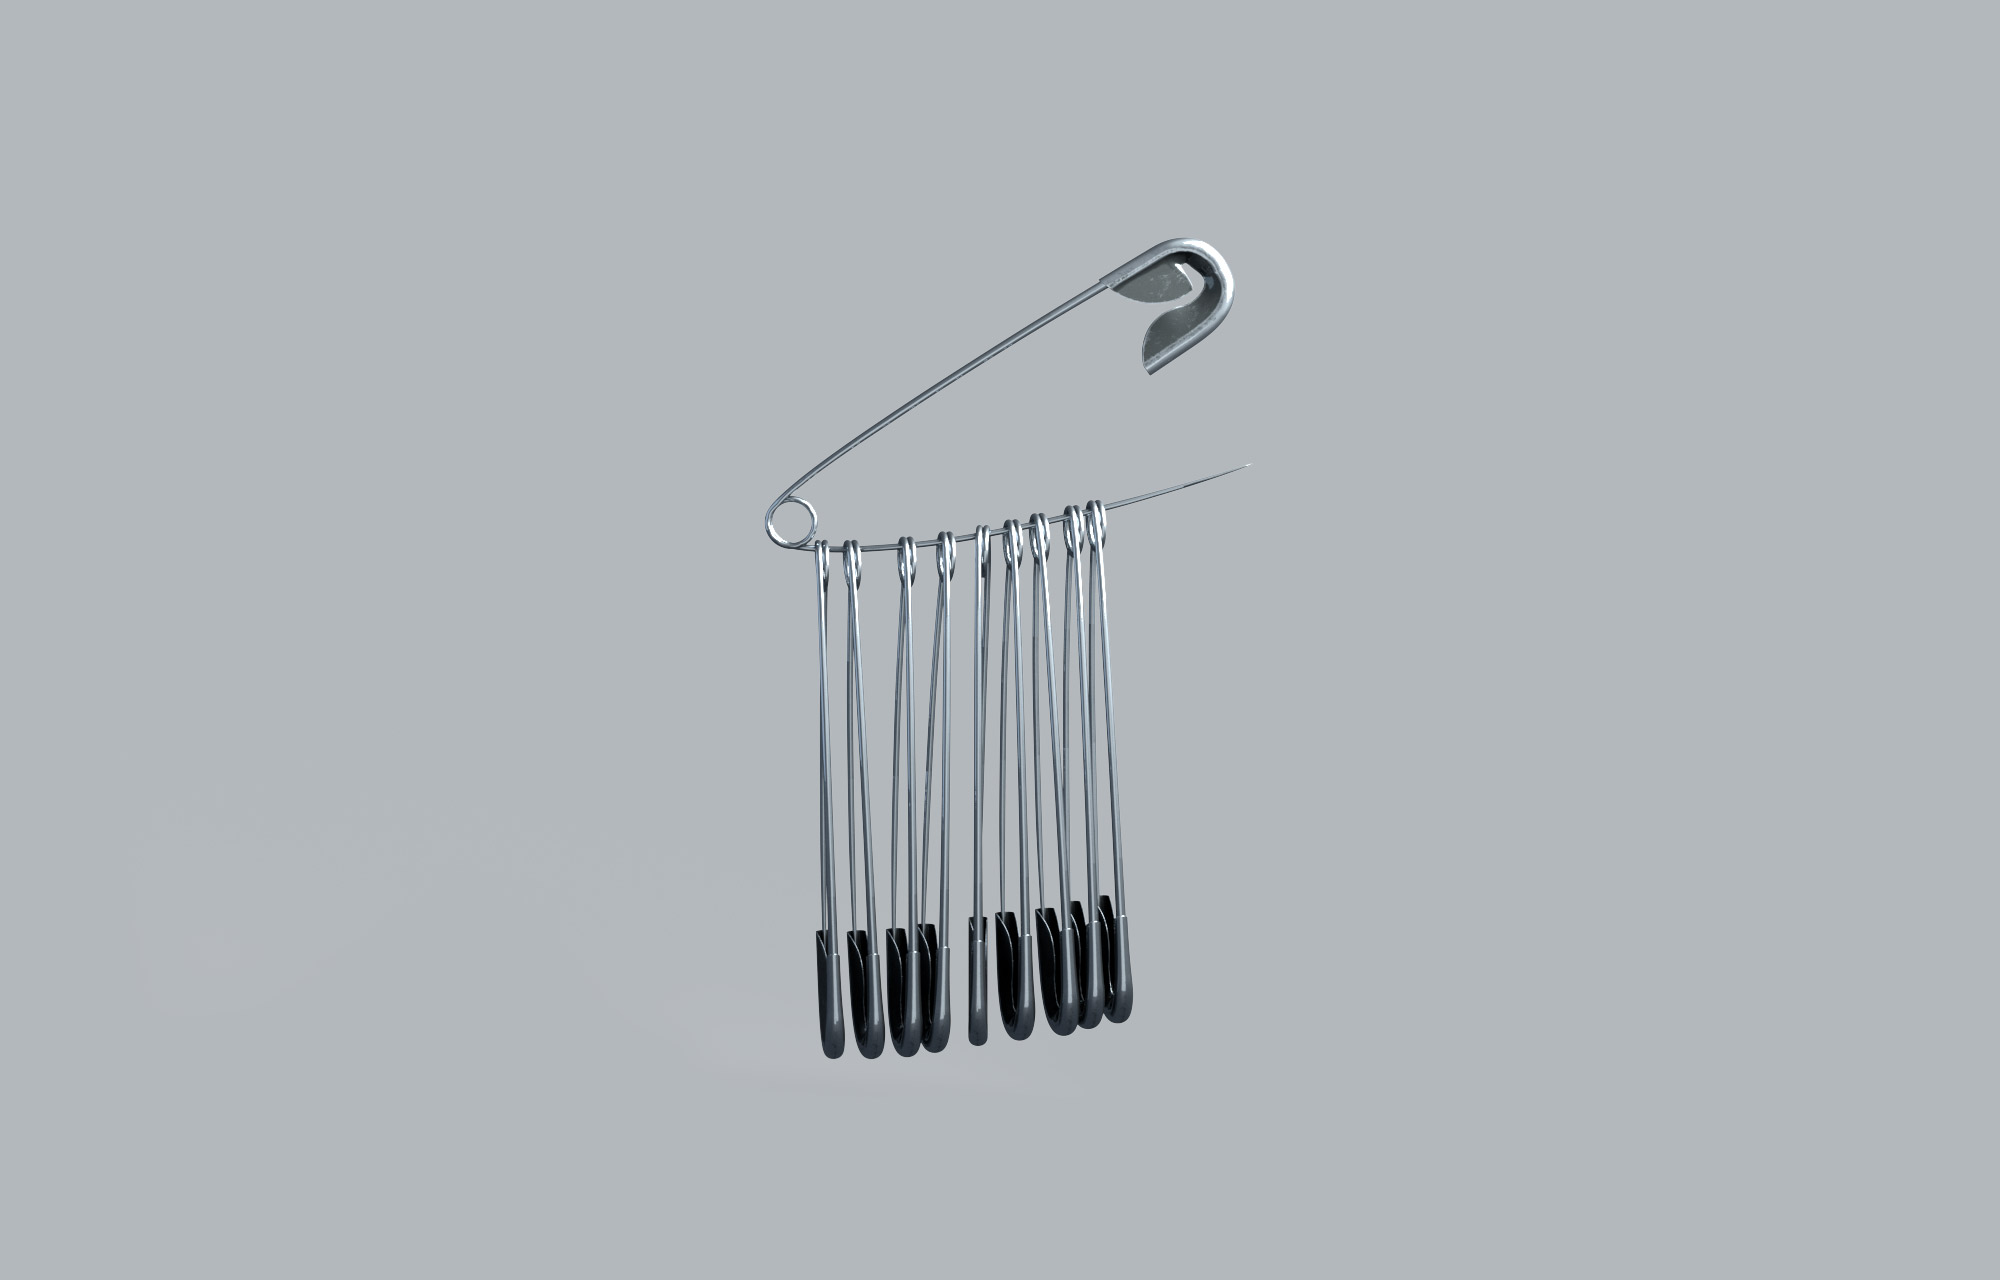 1,274 Small Safety Pins Images, Stock Photos, 3D objects, & Vectors